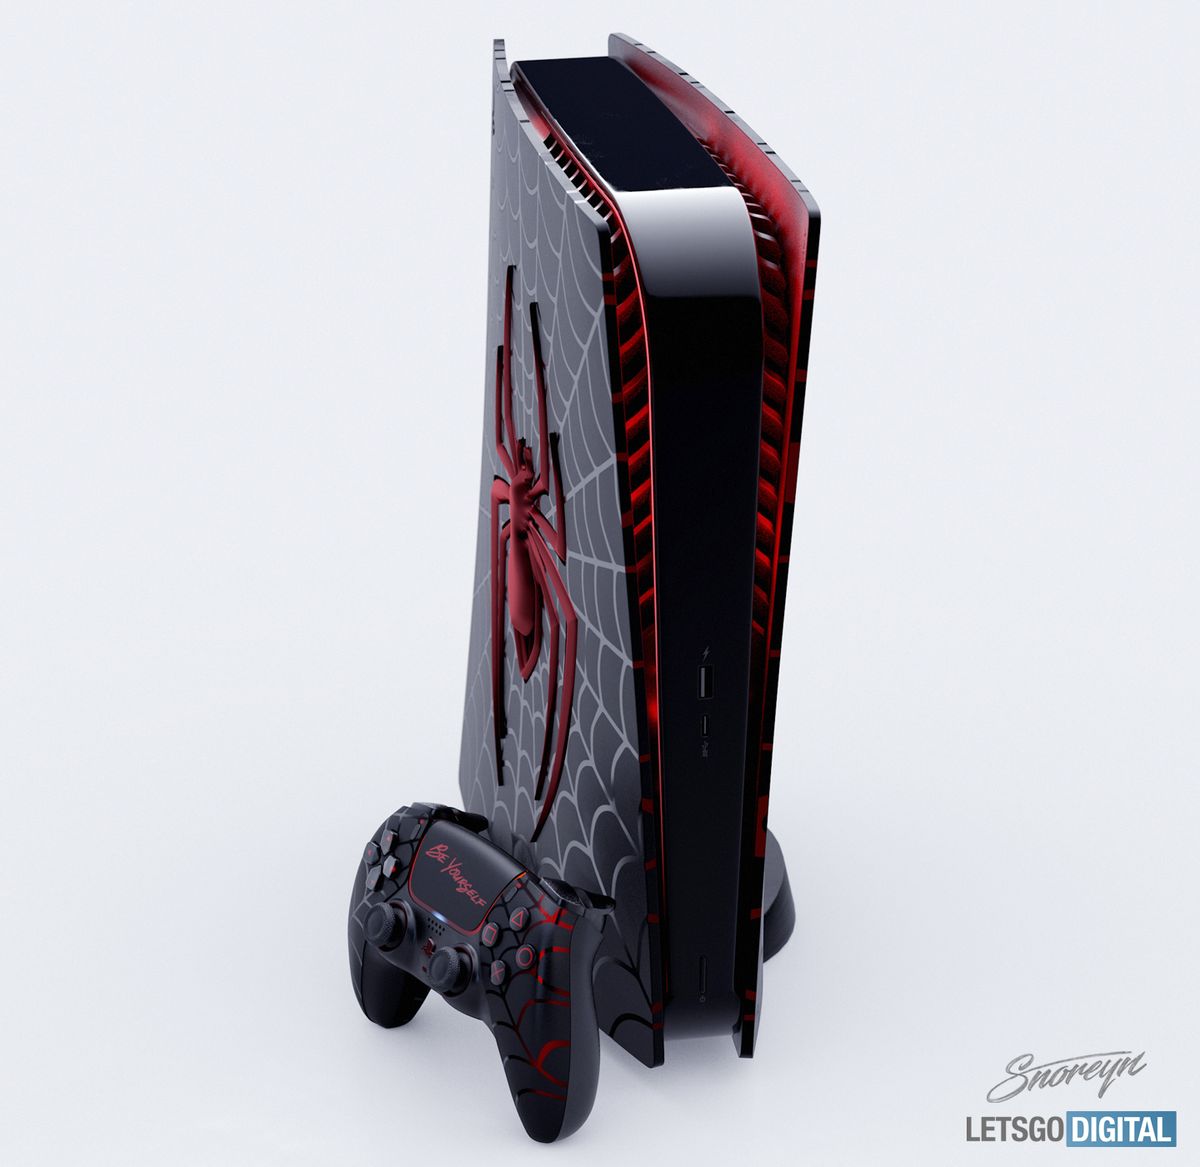 ps5 miles morales console